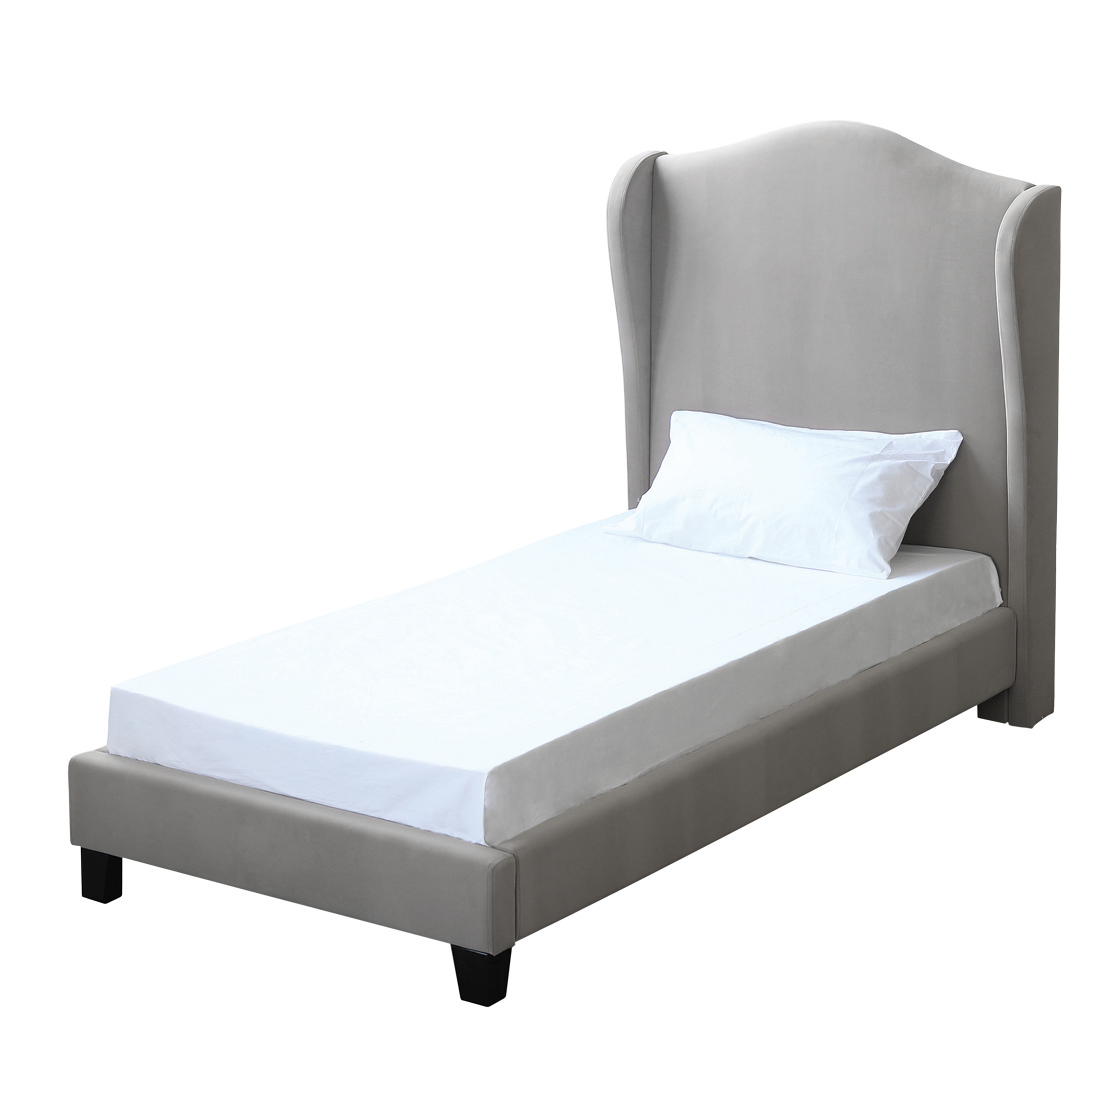 Chisor 3.0 Single Bed Silver